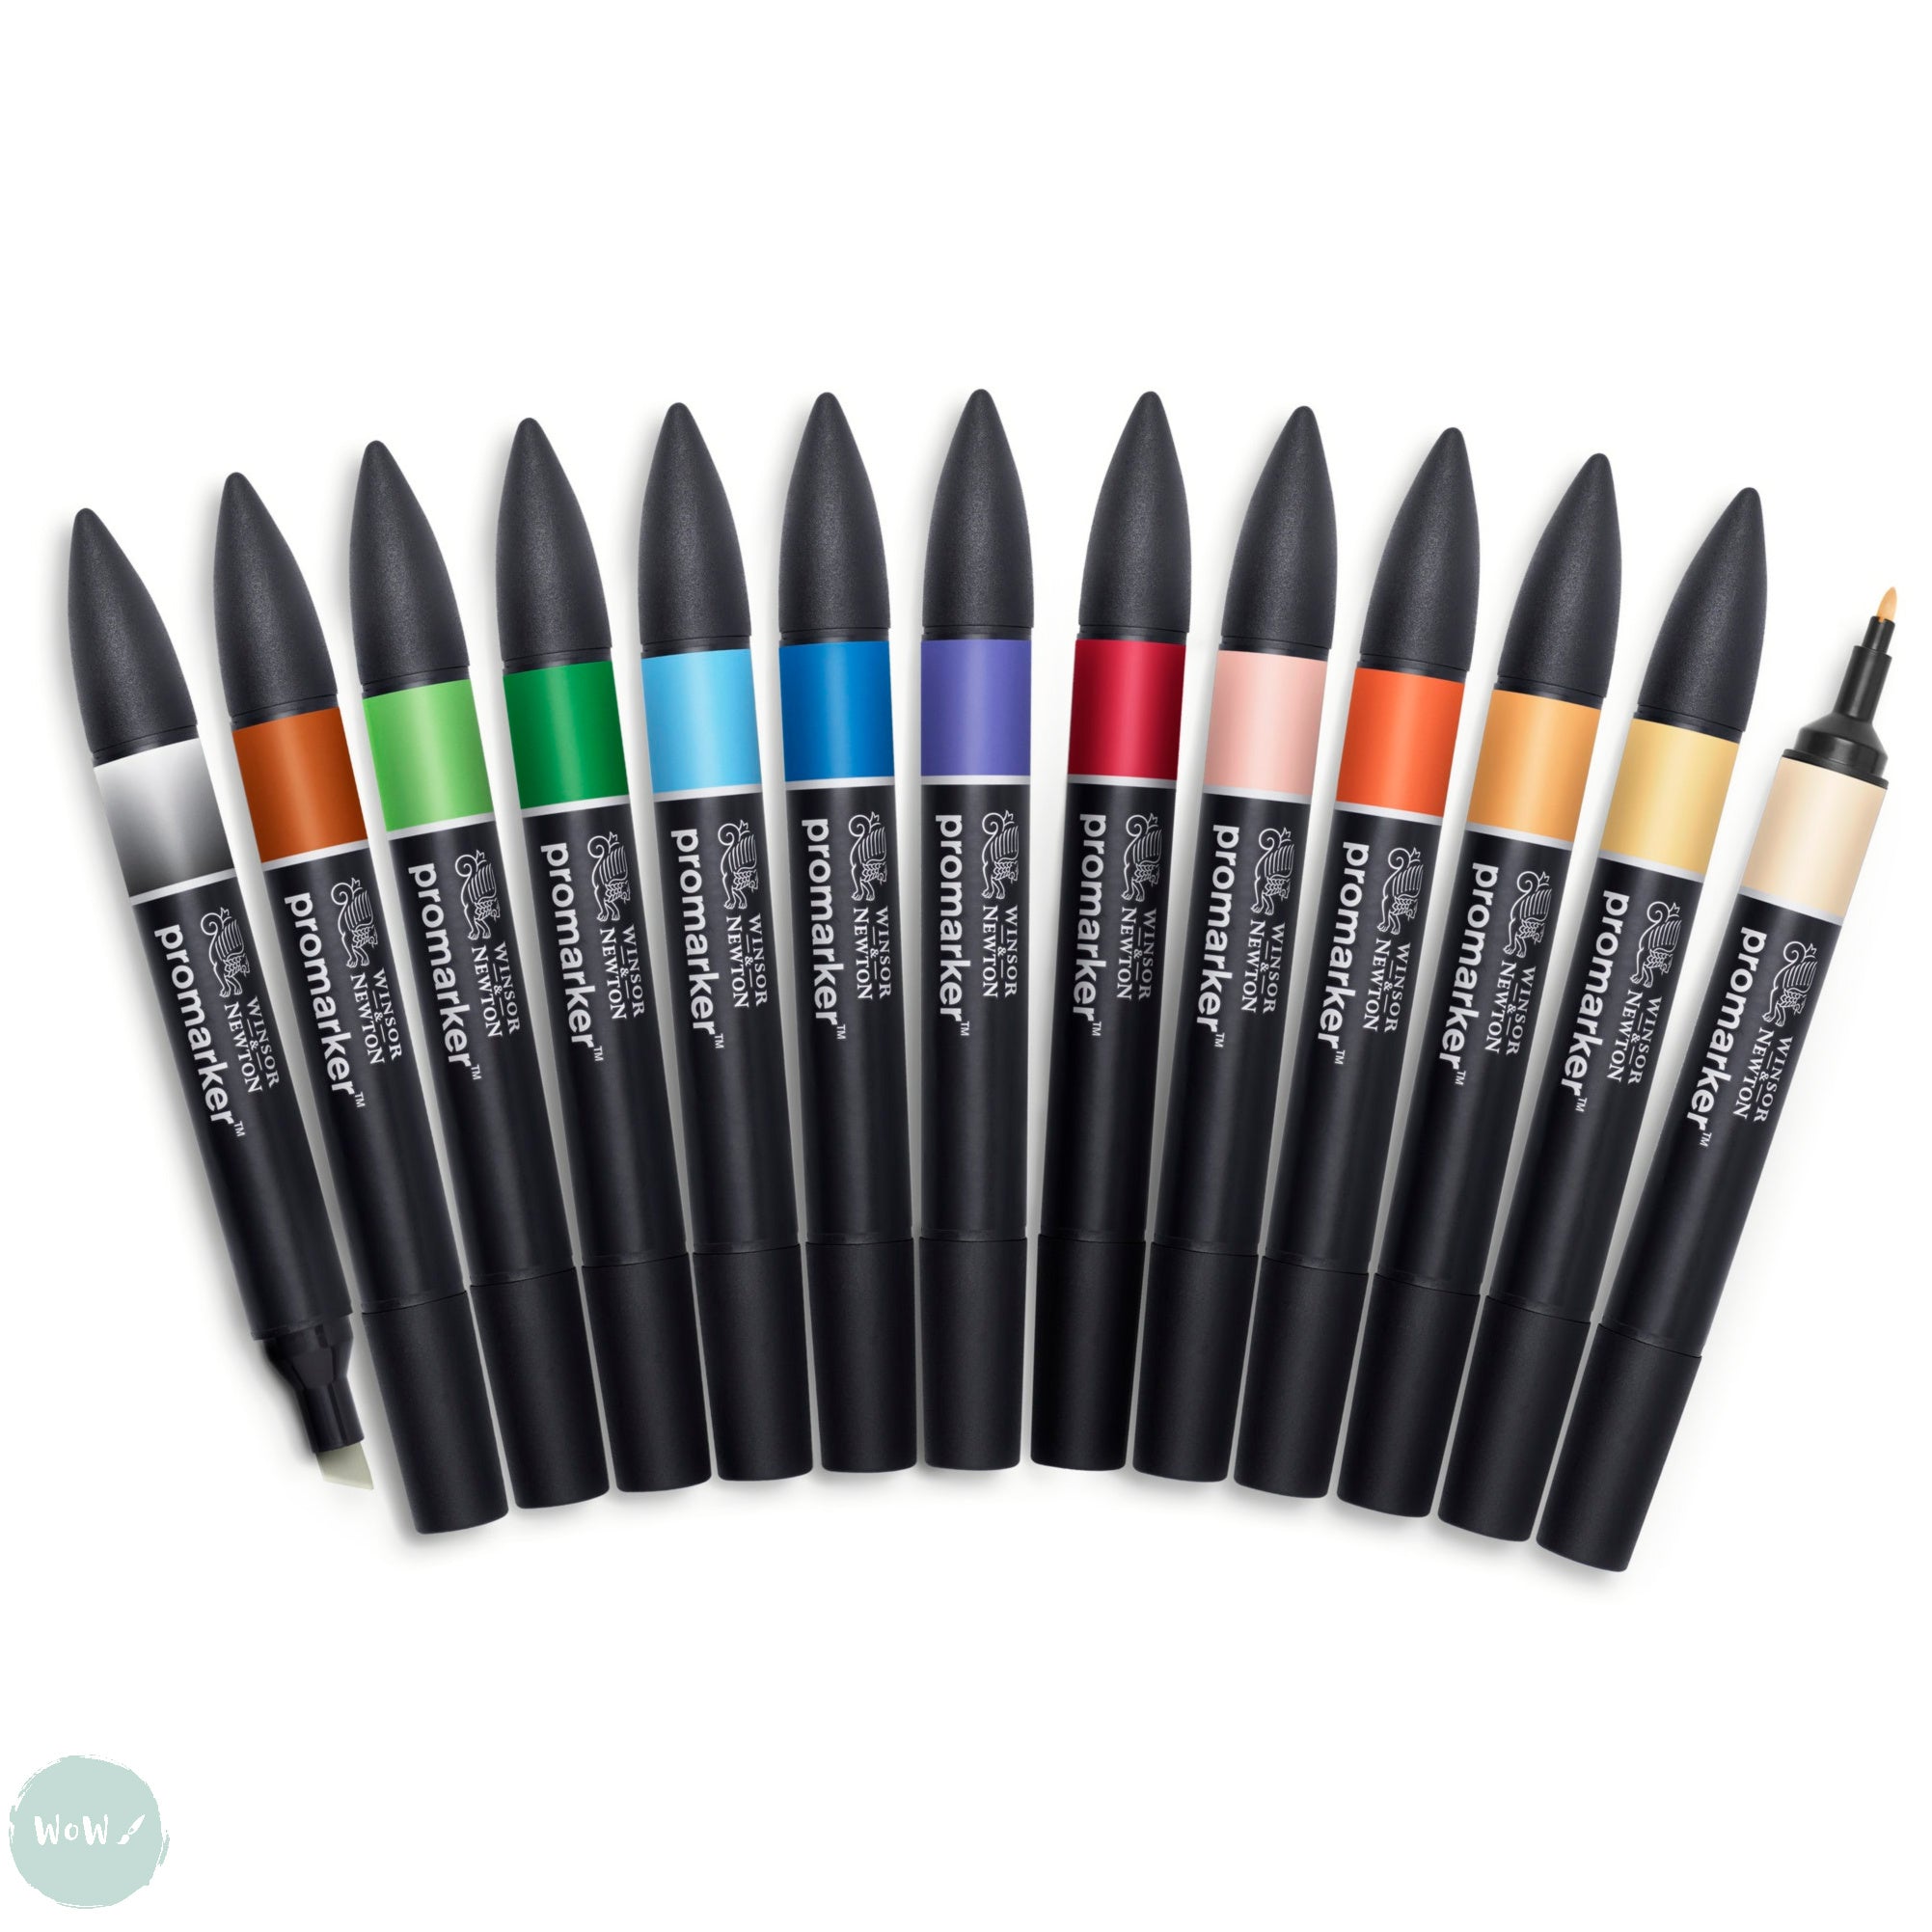 Winsor & Newton Promarker Brush Twin Tipped Alcohol Based Graphic Marker  Pens